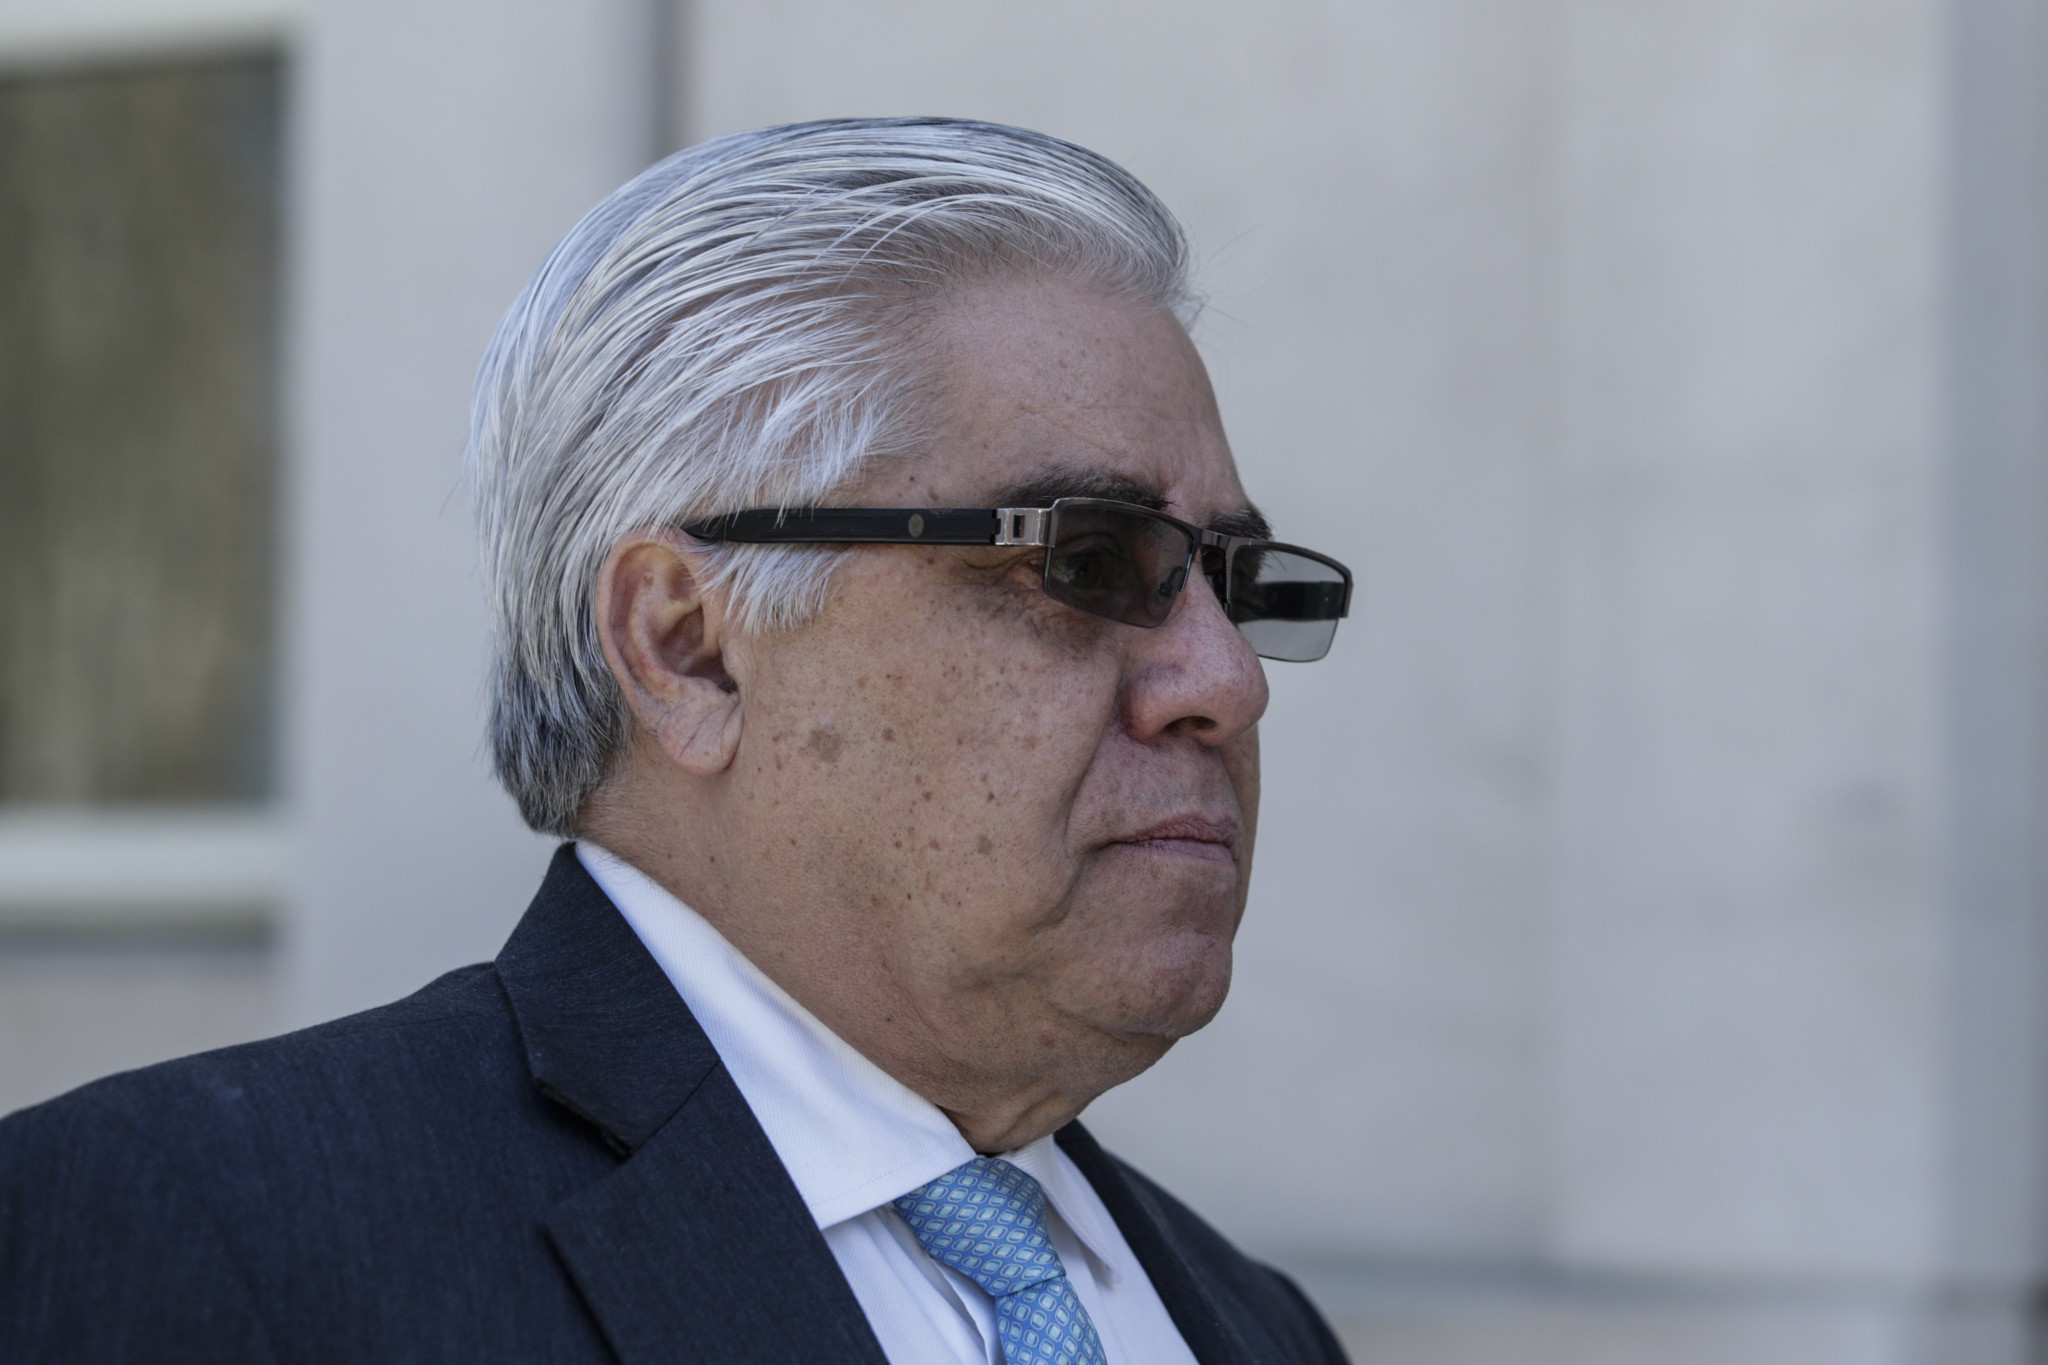 Hector Trujillo has become the first person to be sentenced in the ongoing United States probe into corruption inside FIFA ©Getty Images